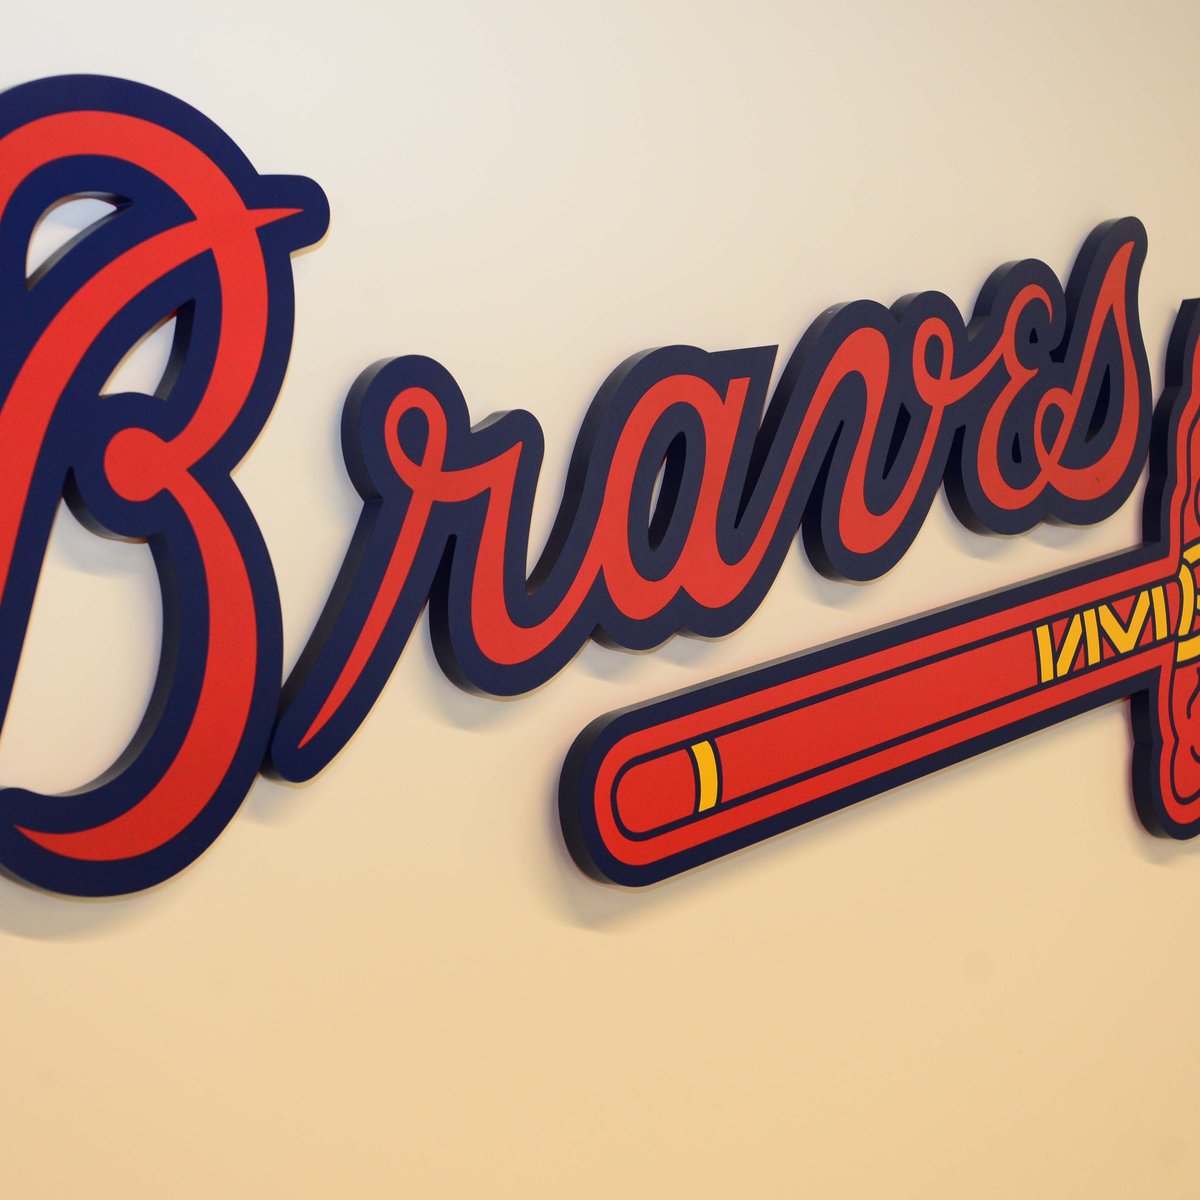 Braves playoff tickets, What to know about getting them